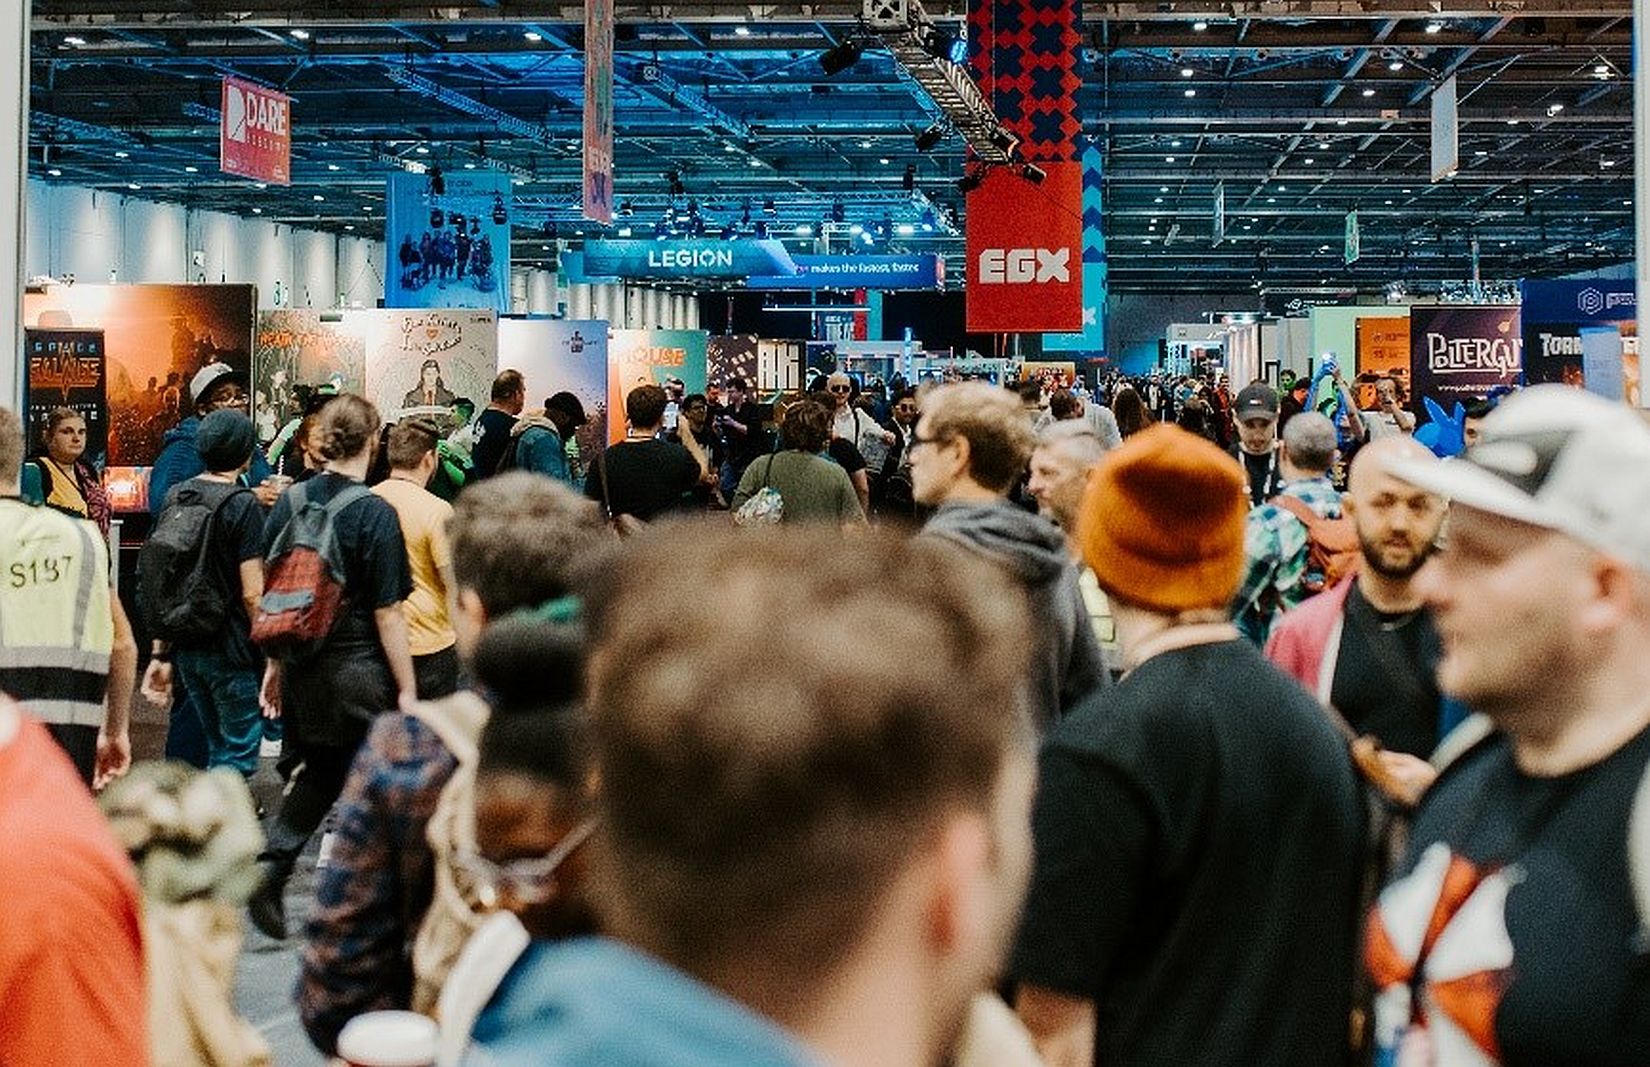 vg247.com - Stephany Nunneley-Jackson - EGX Tickets are now on sale, and you can get 20% off with the Early Bird offer